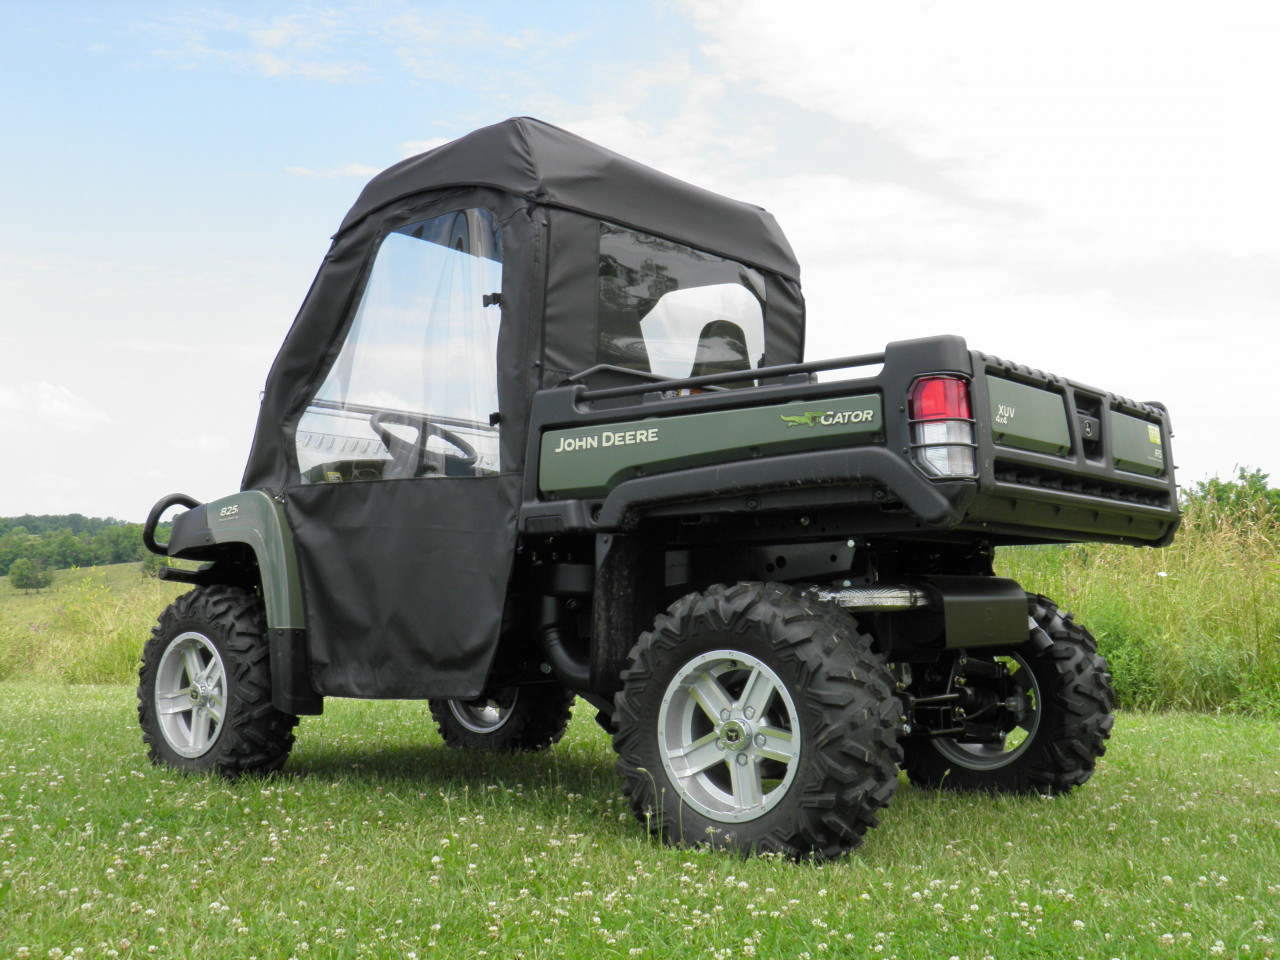 3 Star side x side John Deere HPX/XUV full cab enclosure rear and side angle view